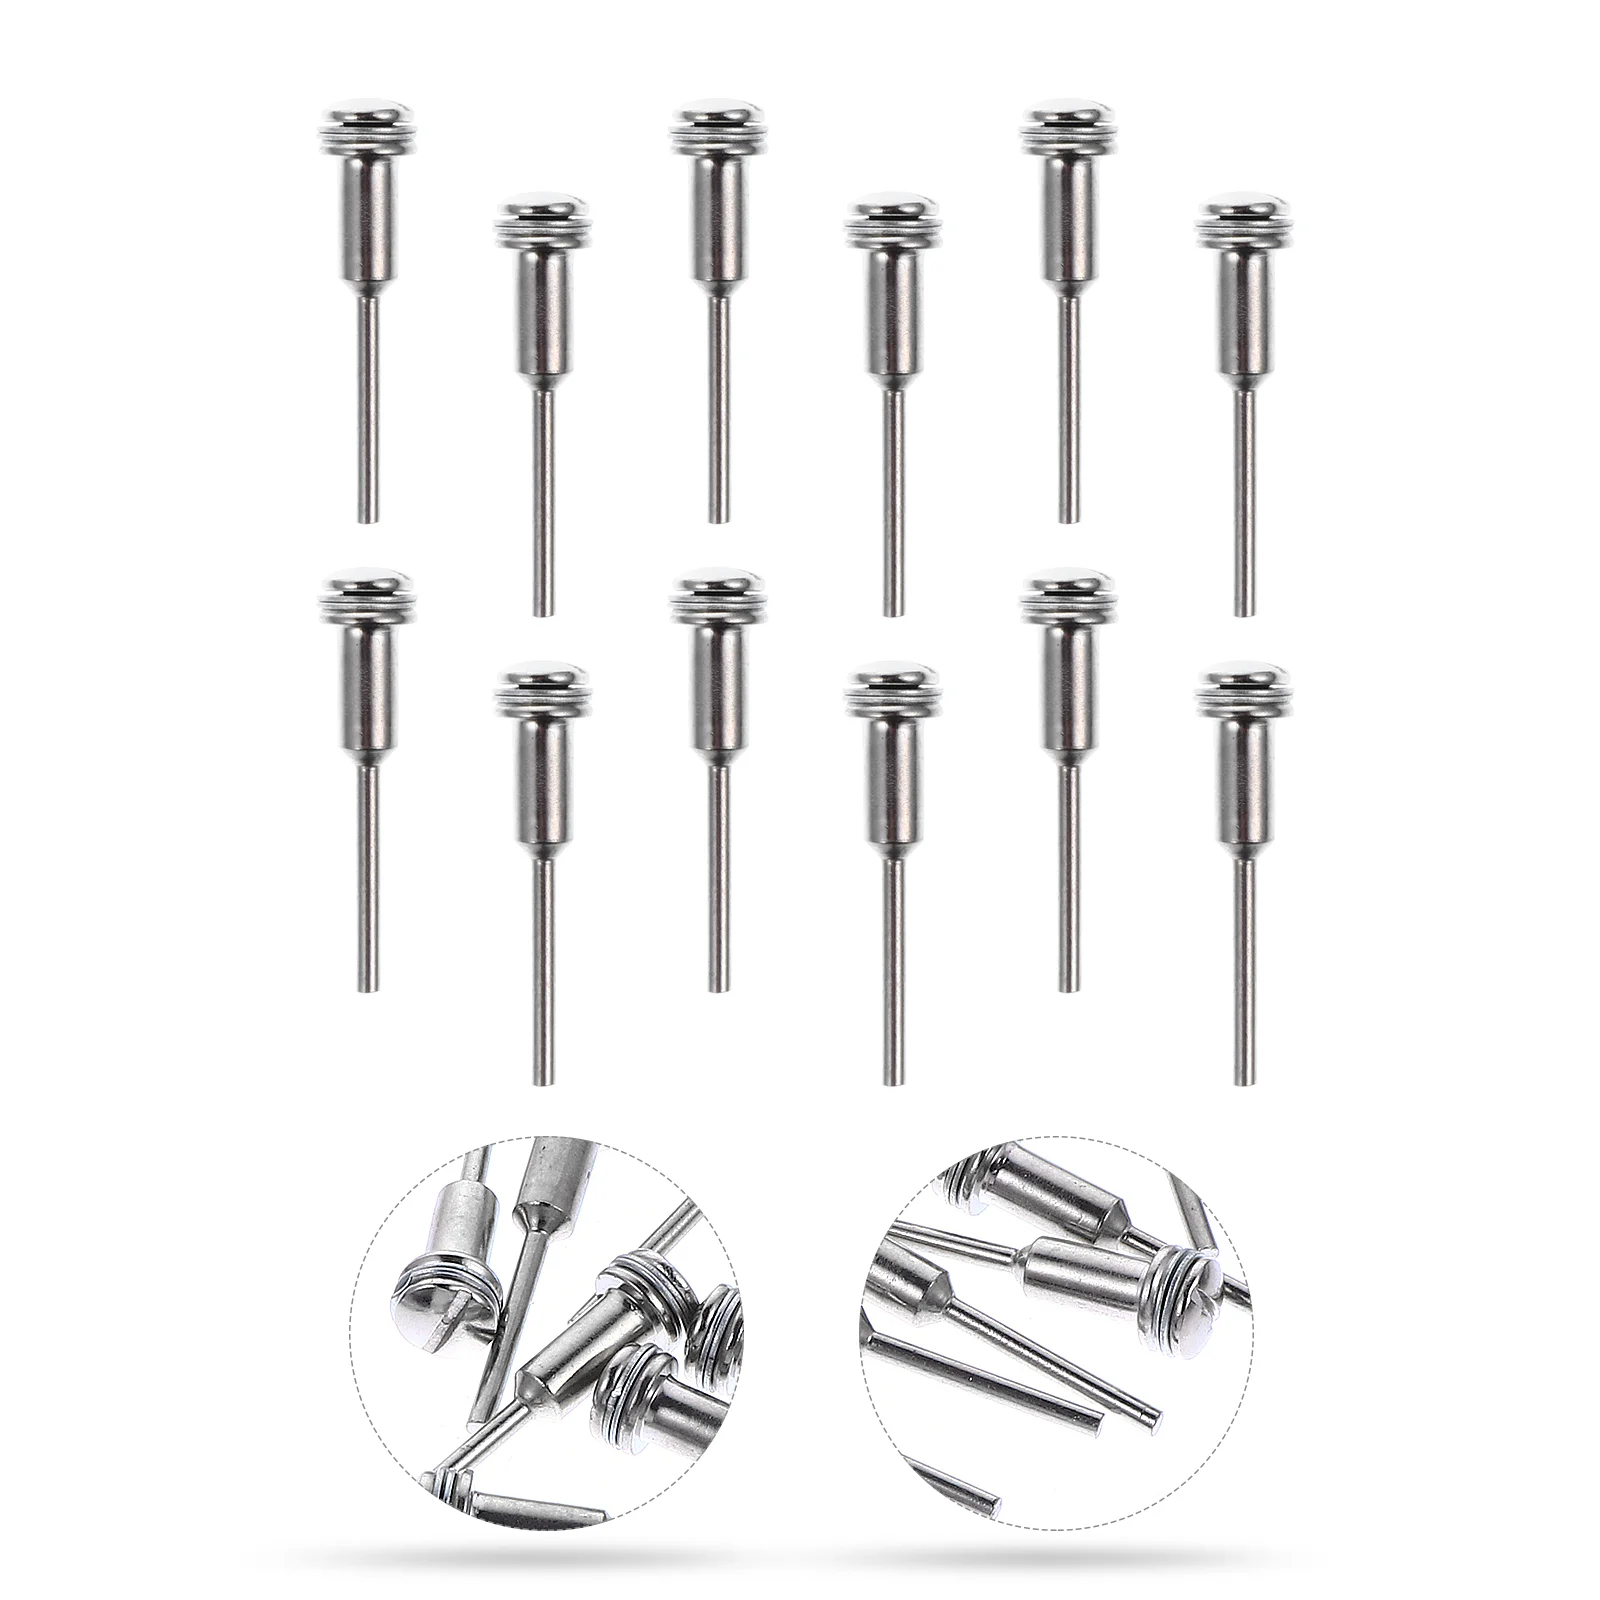 

20 Pcs High Speed Steel Connecting Rod Multipurpose Rods Premium Clamping Safe Quality 5x1x0.3cm Screw Silver